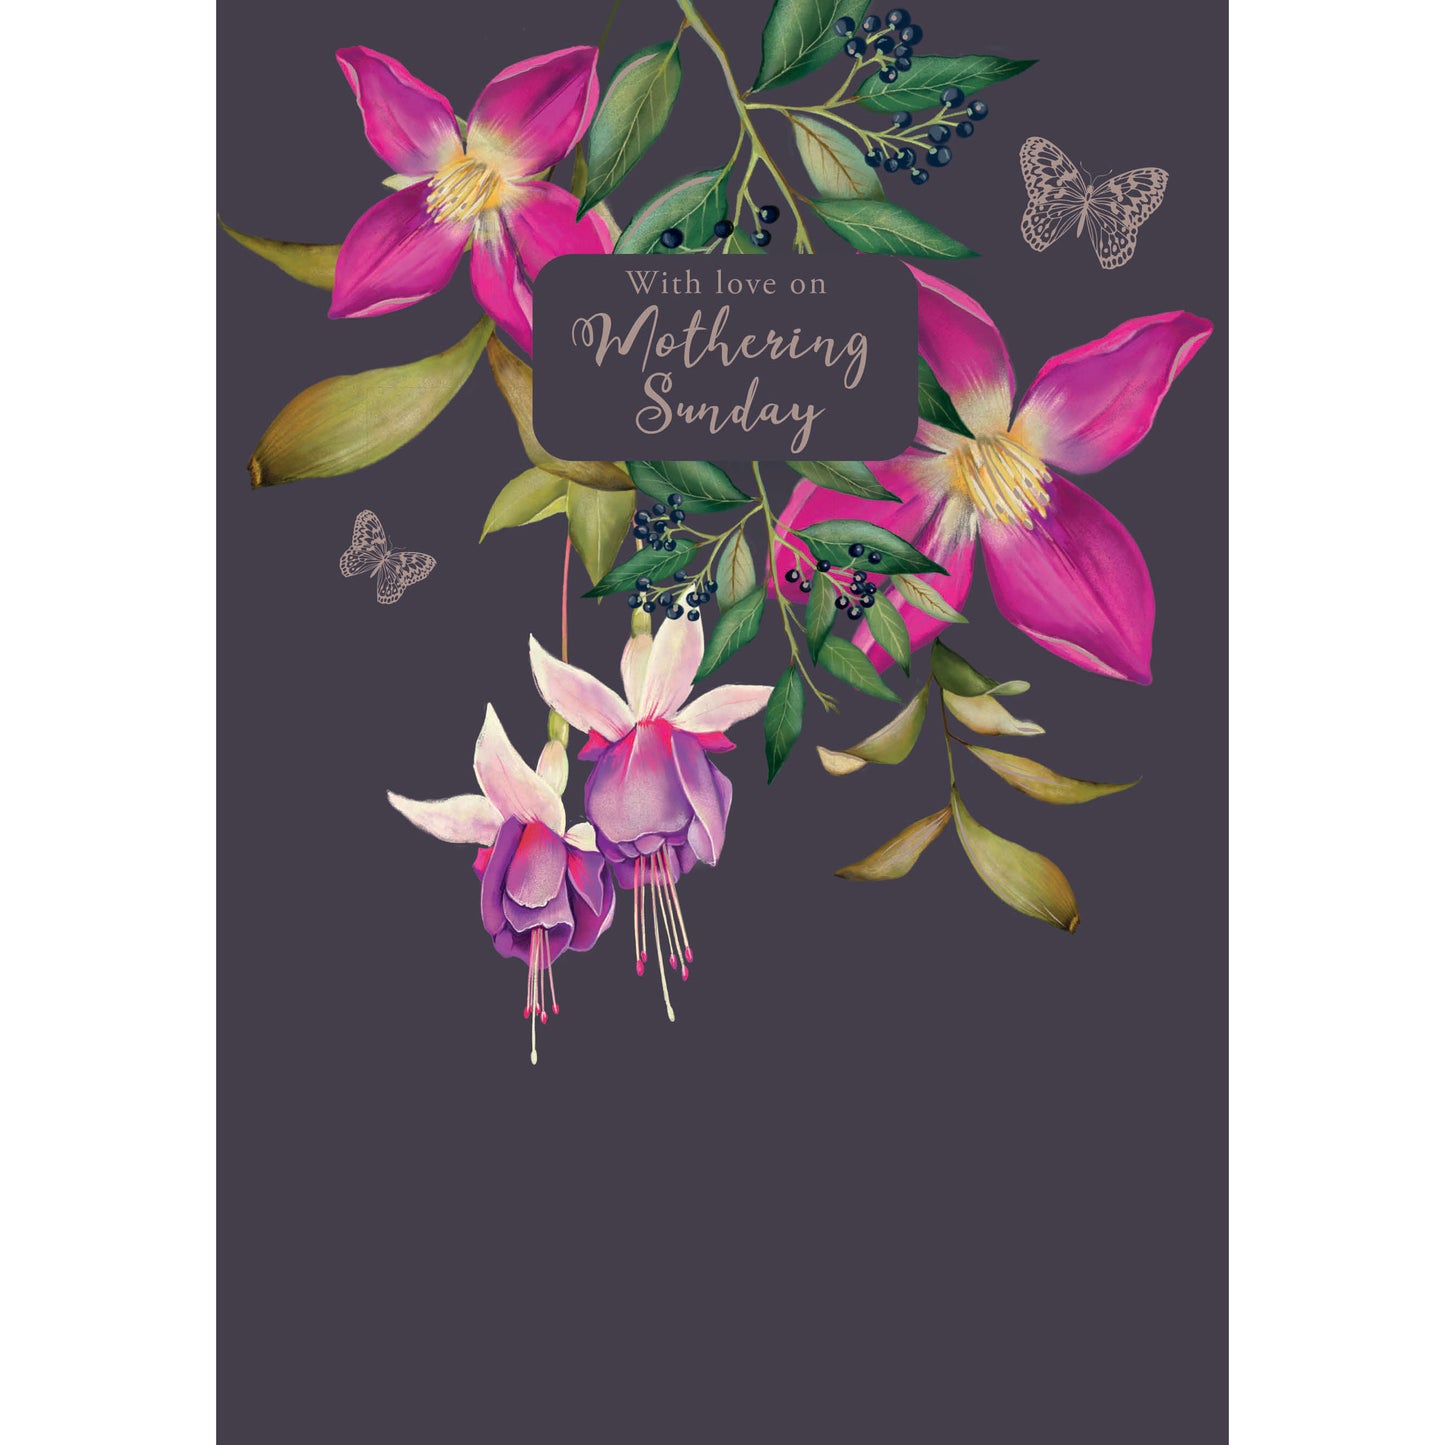 Mother's Day Card - Floral Mothering Sunday